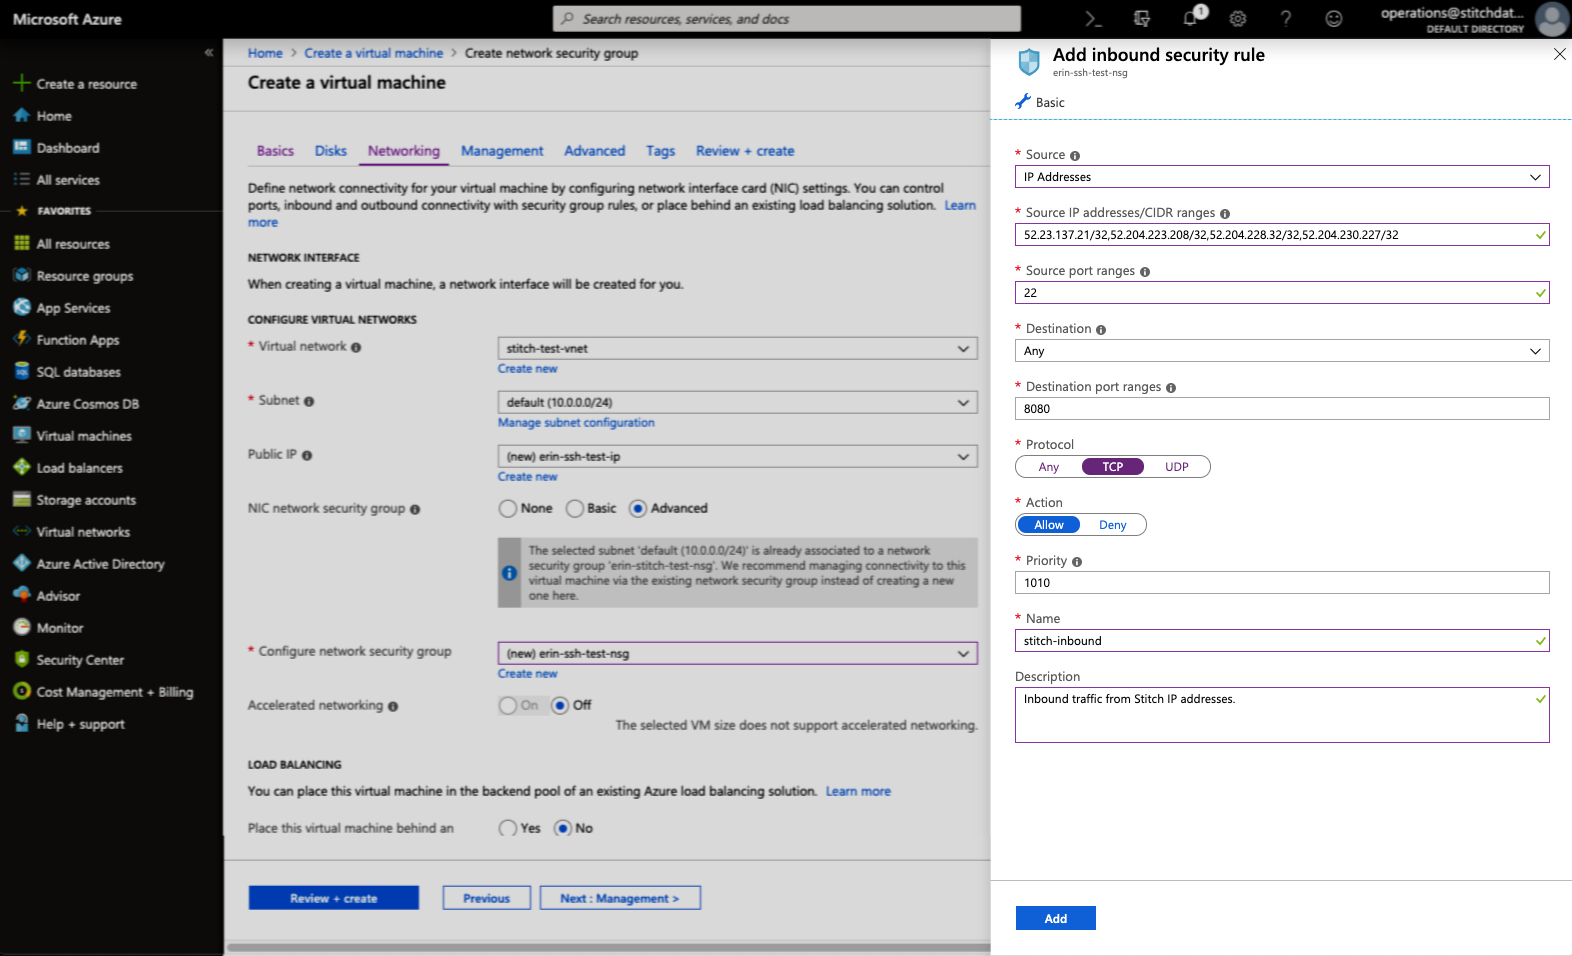 The Add inbound security rule panel in Azure, highlighted